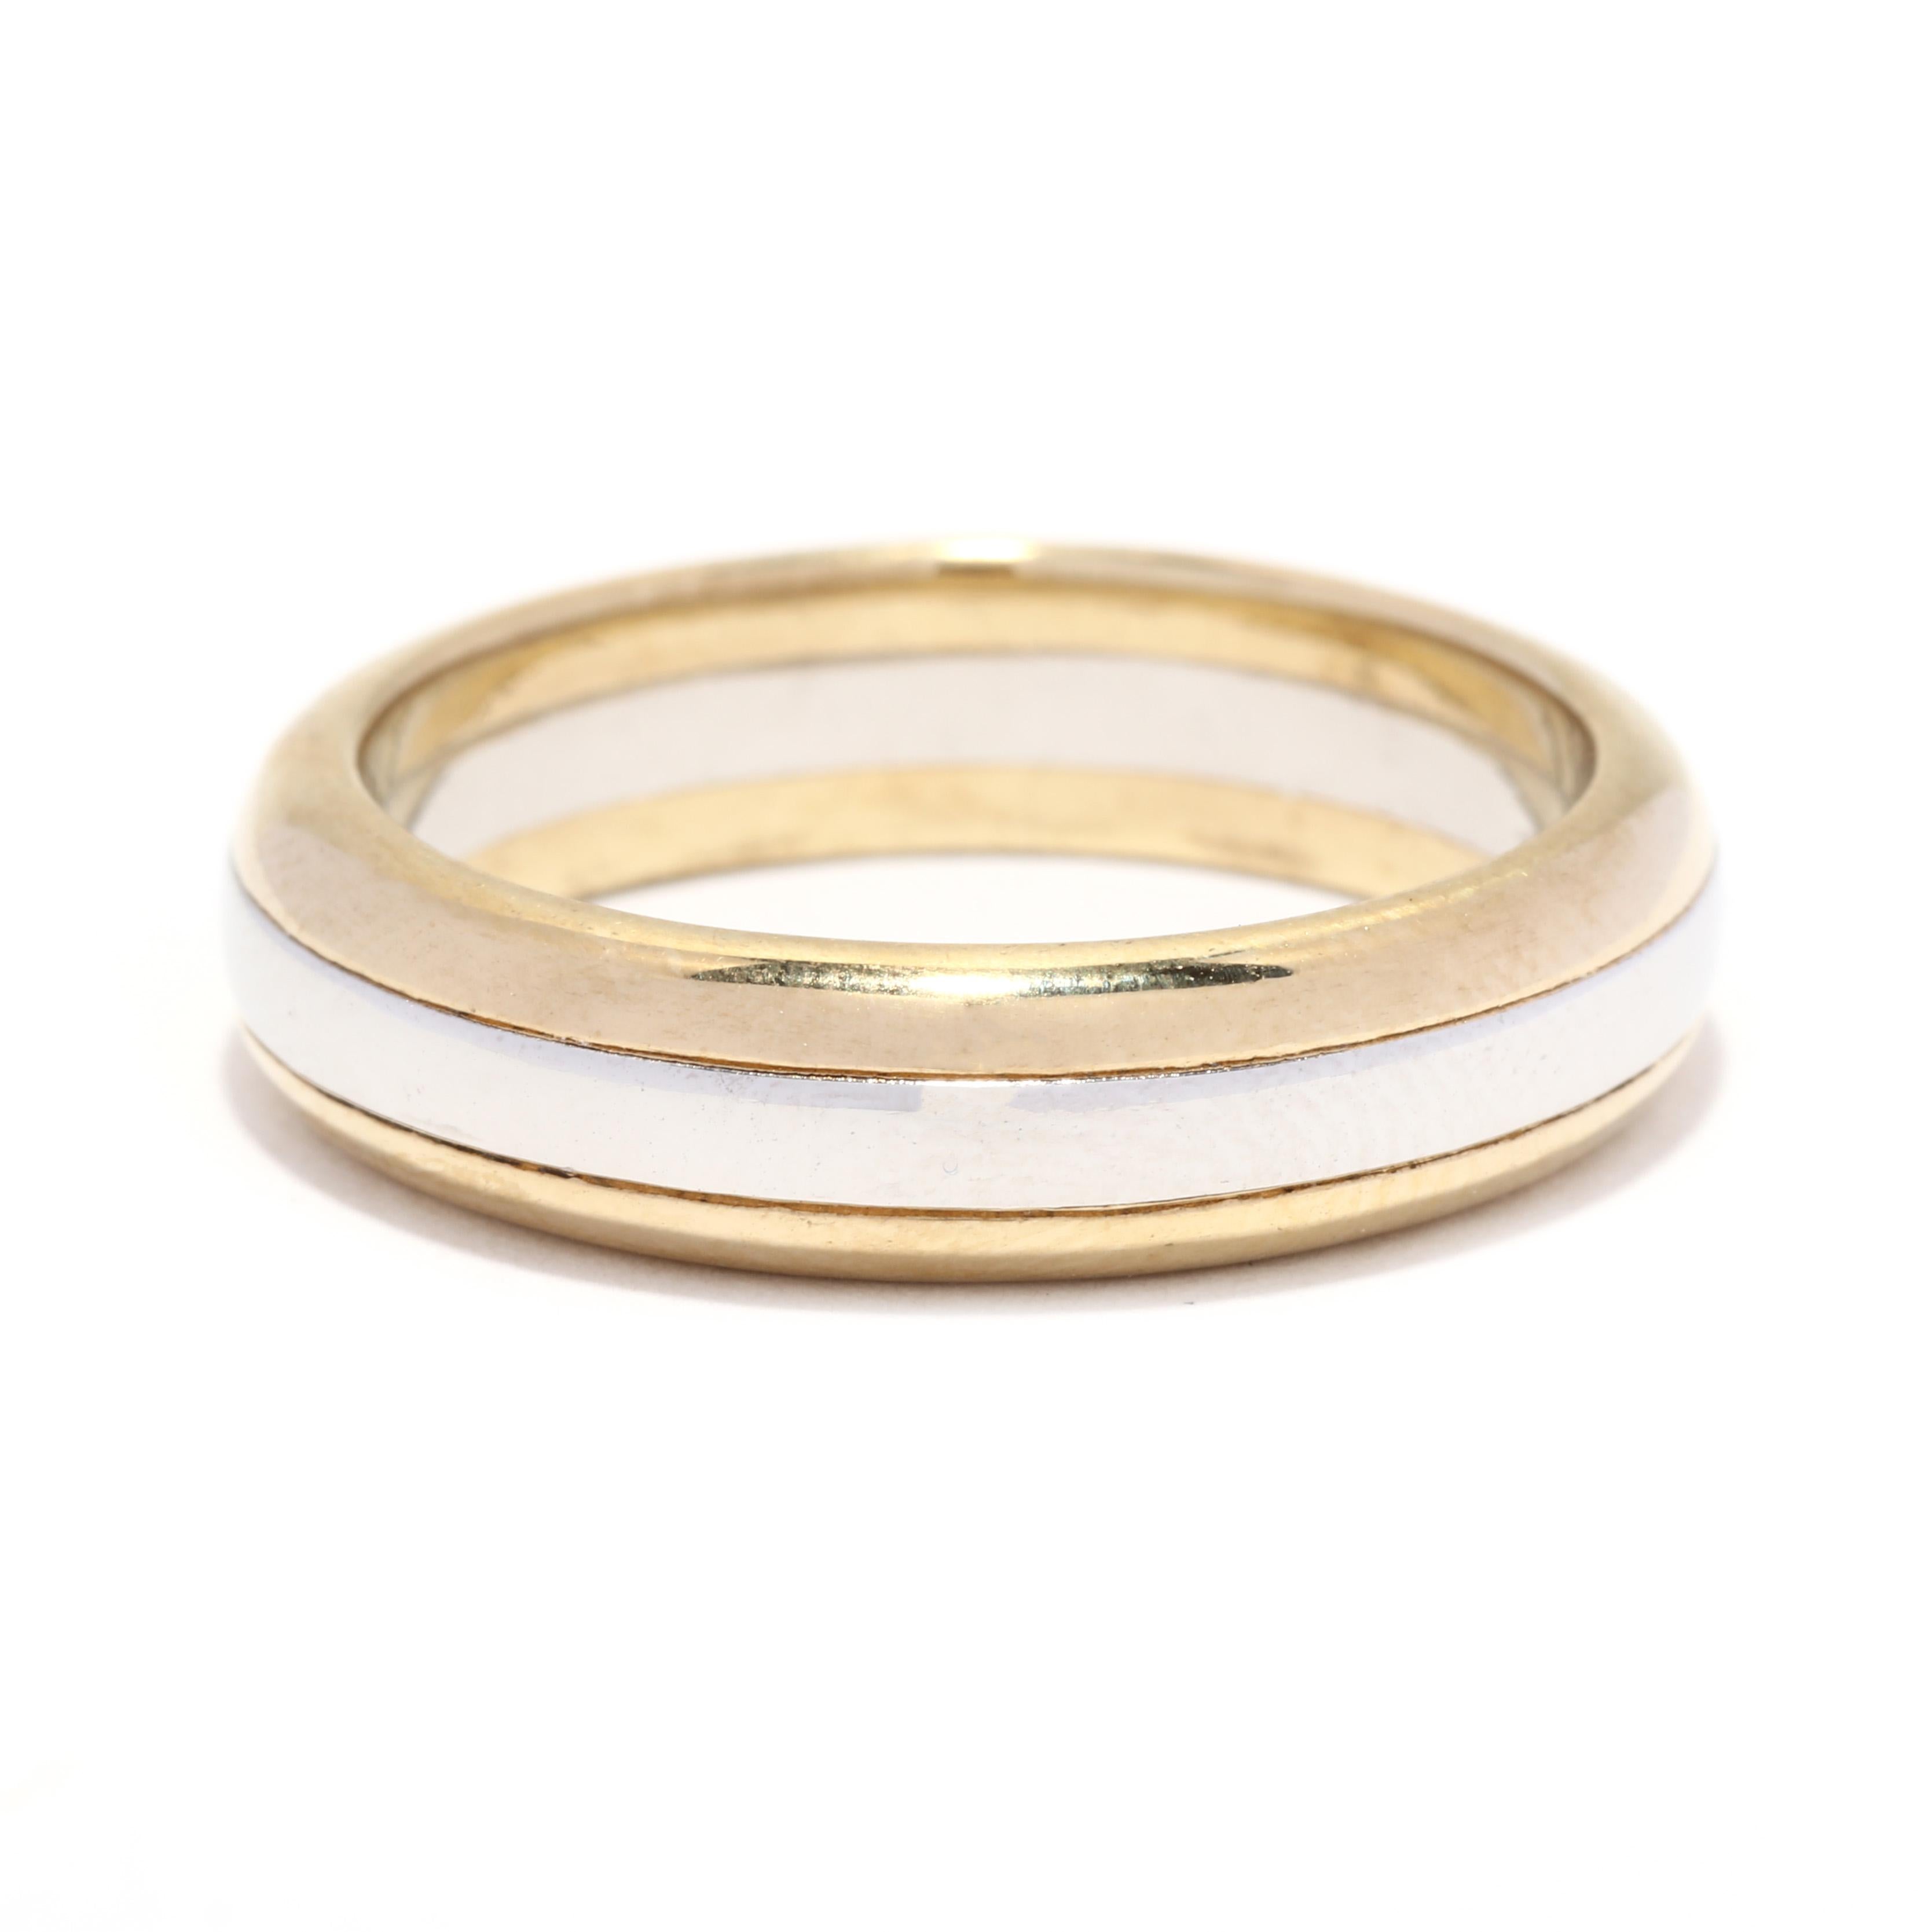 A vintage platinum and 14 karat yellow gold two tone wedding band. This stackable band features a plain polished platinum band with yellow gold edges.

Ring Size: 8.75

Rise Off Of Finger: 2.5 mm

Width: 5.25 mm

Weight: 7.8 dwts. / 12.1